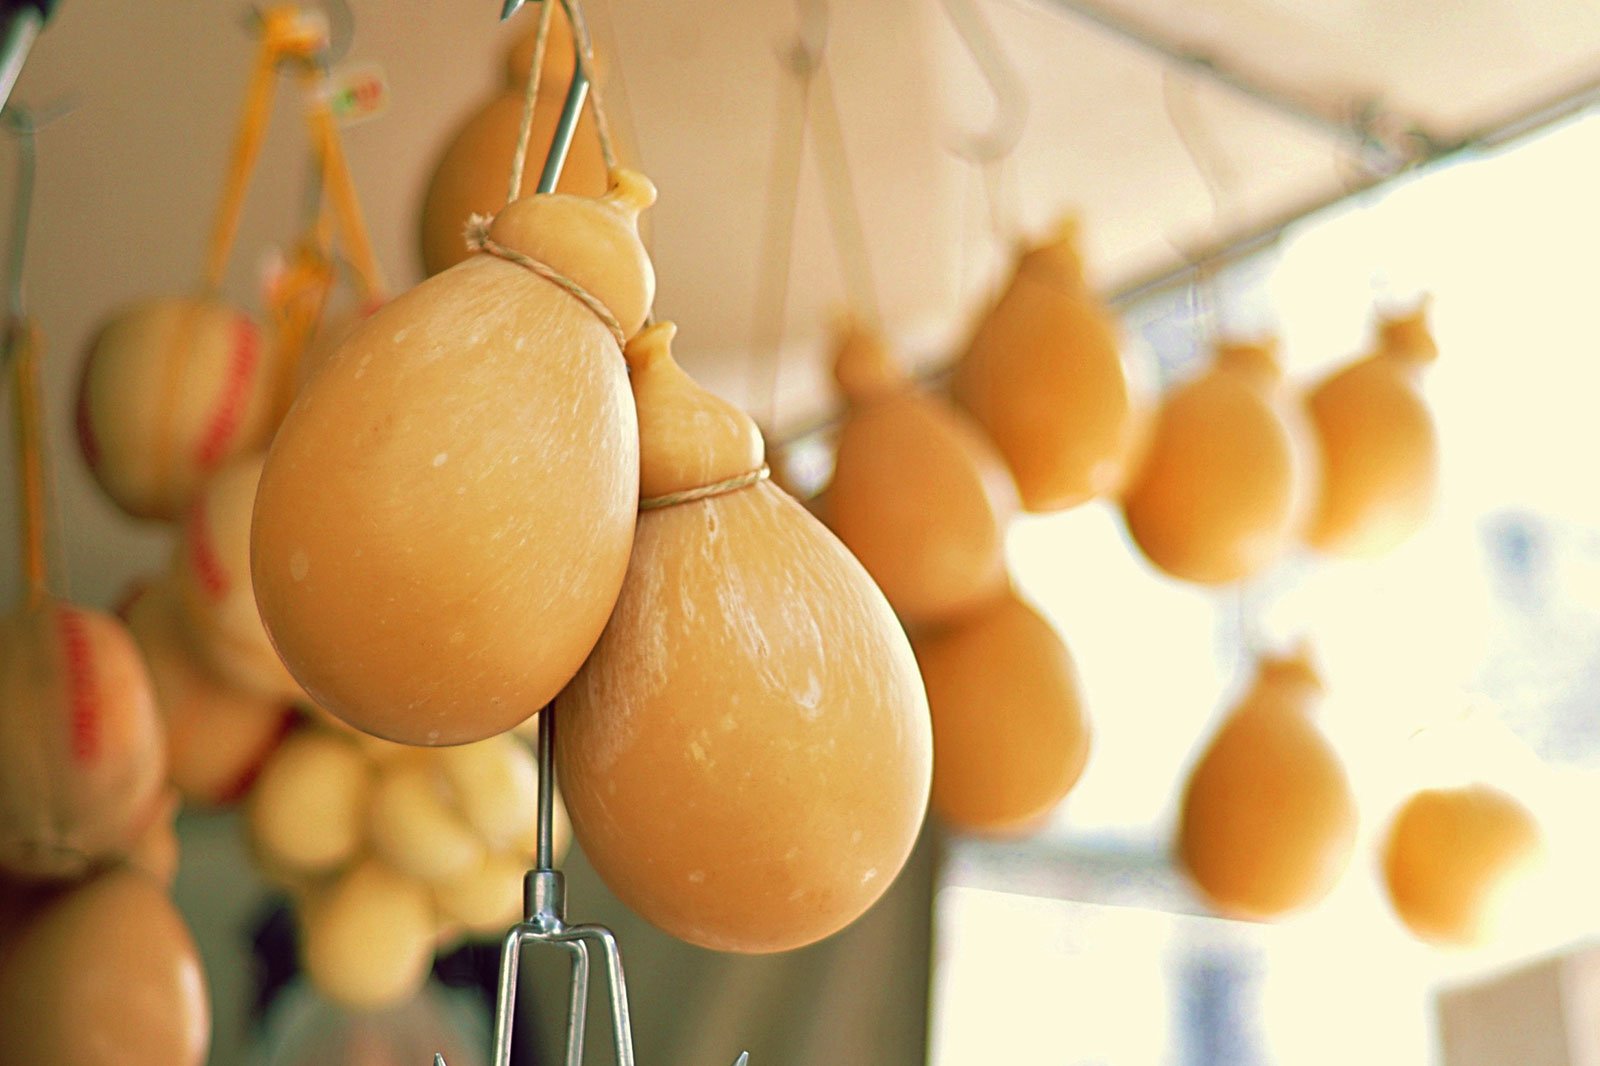 How to try the caciocavallo cheese in Rome